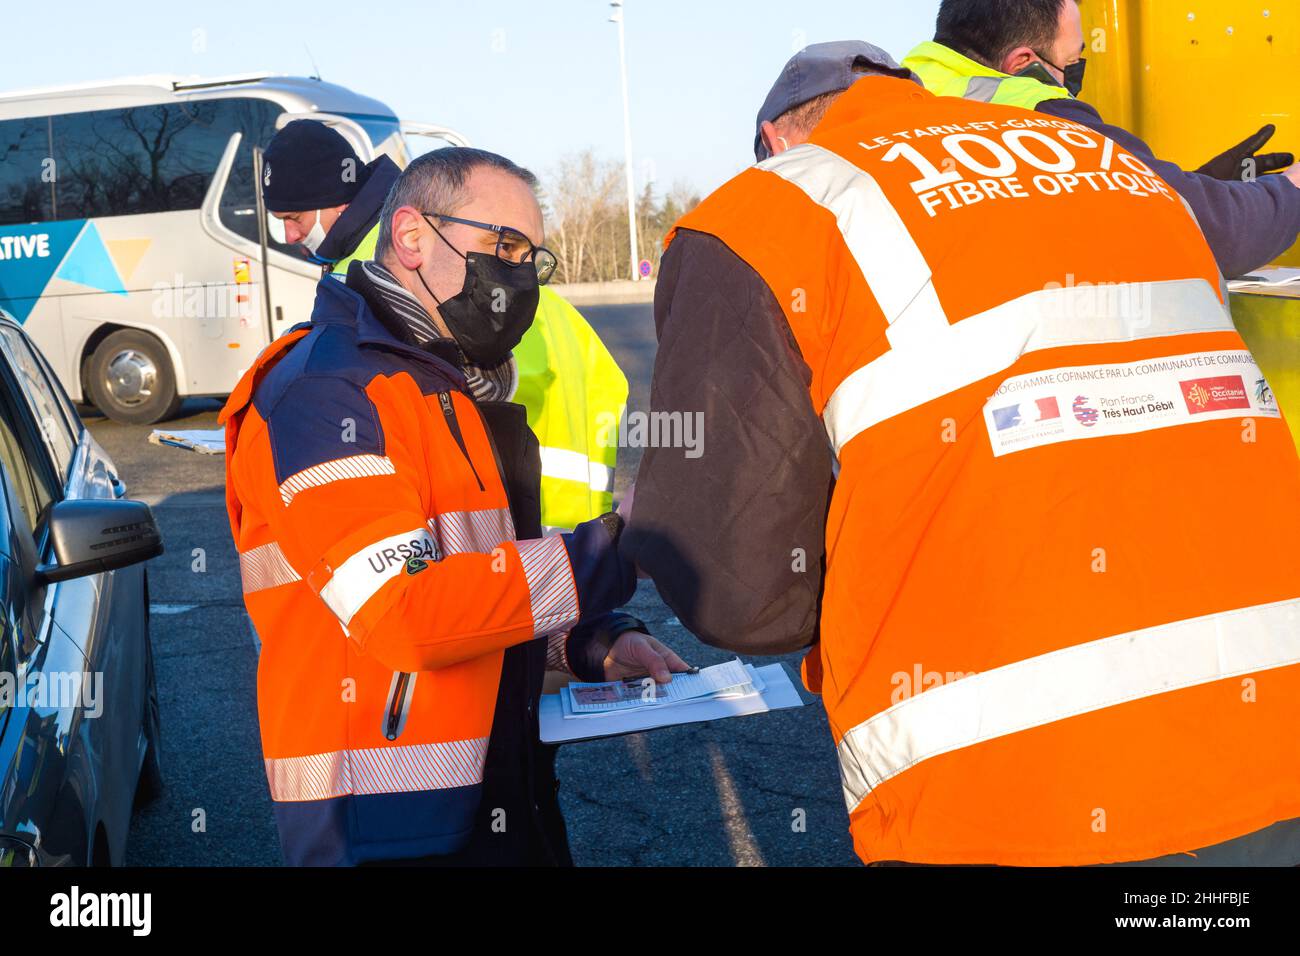 France, Montauban, 2022-01-24. Urssaf controller. Operation of road control of the gendarmerie and Urssaf against the illegal work in the village of Bressols. Photo by Patricia Huchot-Boissier/ABACAPRESS.COM France, Montauban, 2022-01-24. Controleur Urssaf. Operation de controle routier de la gendarmerie et Urssaf contre le travail illegale au peage de Bressols. Photographie de Patricia Huchot-Boissier/ABACAPRESS.COM Stock Photo